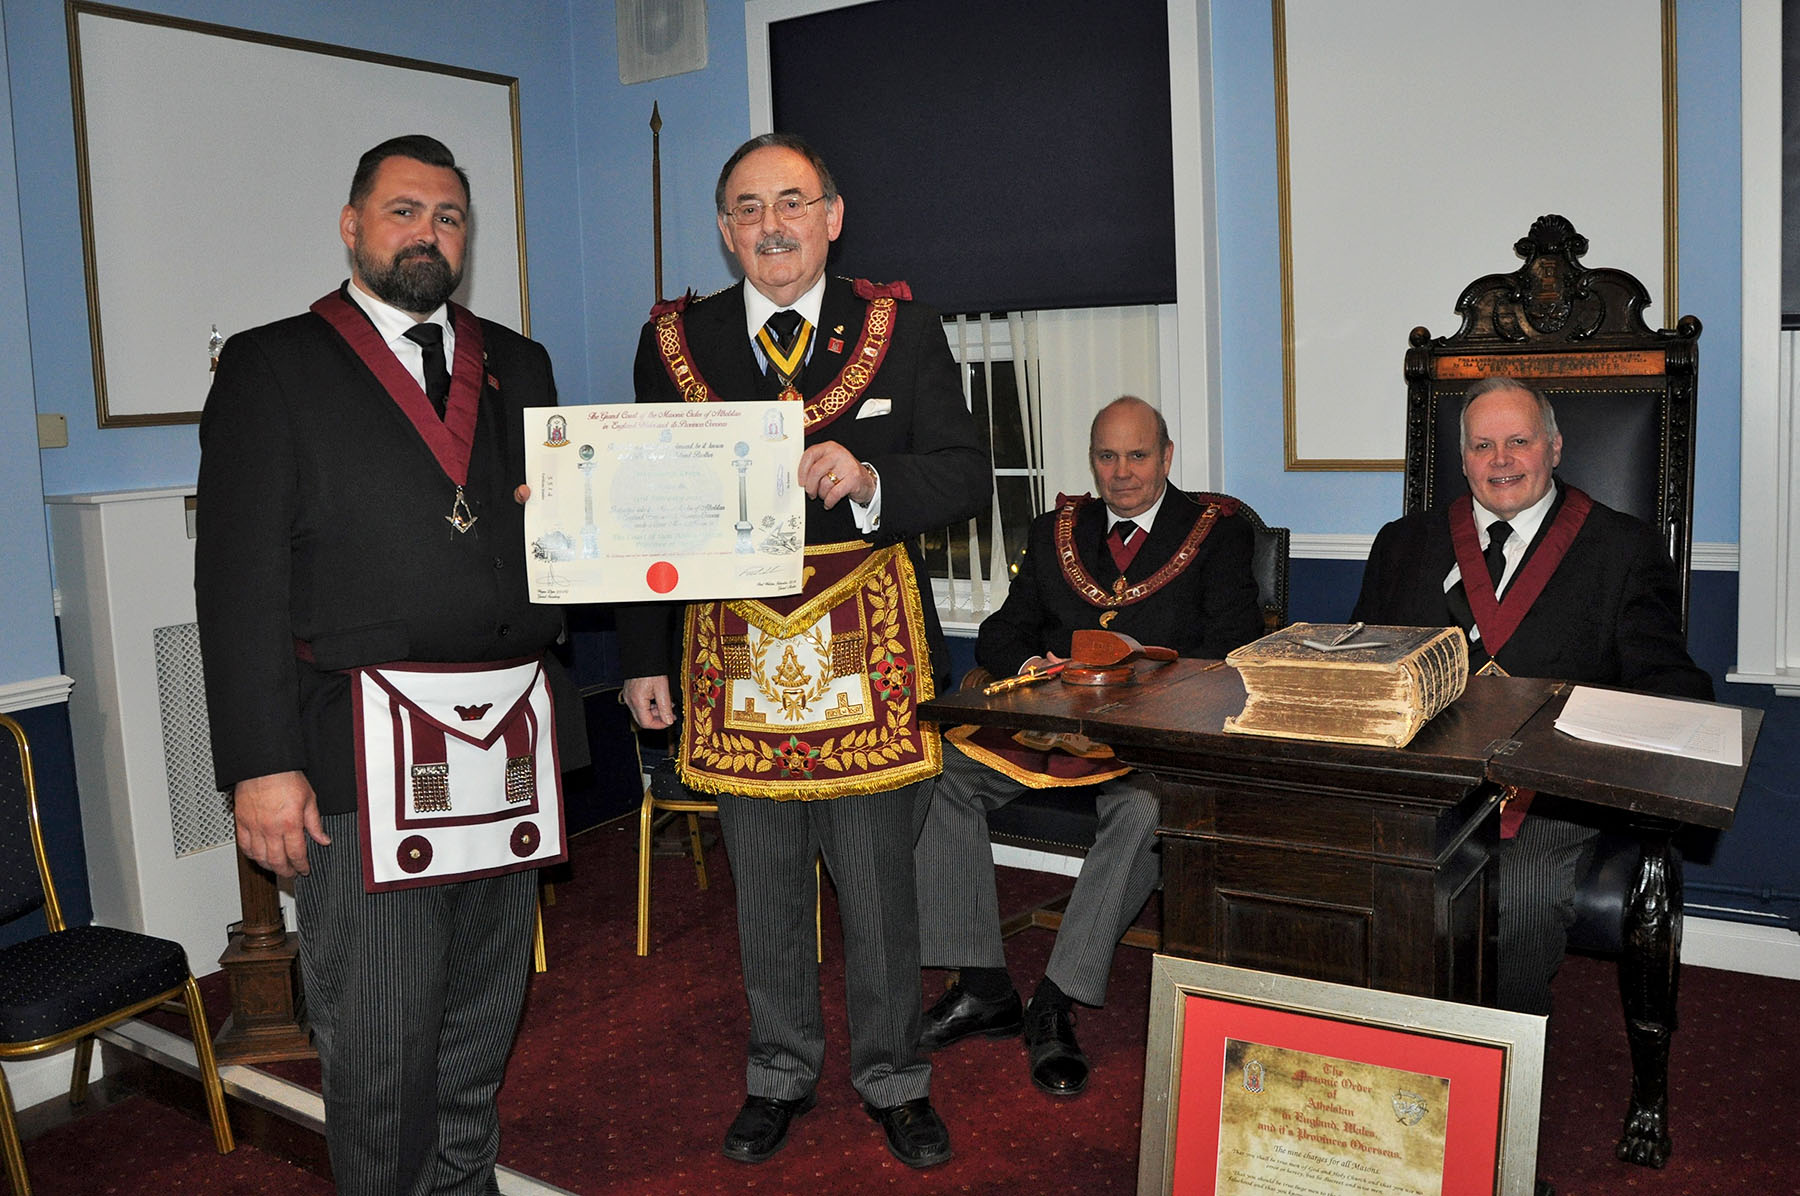 The Installation Meeting of The Court of Sion Abbey